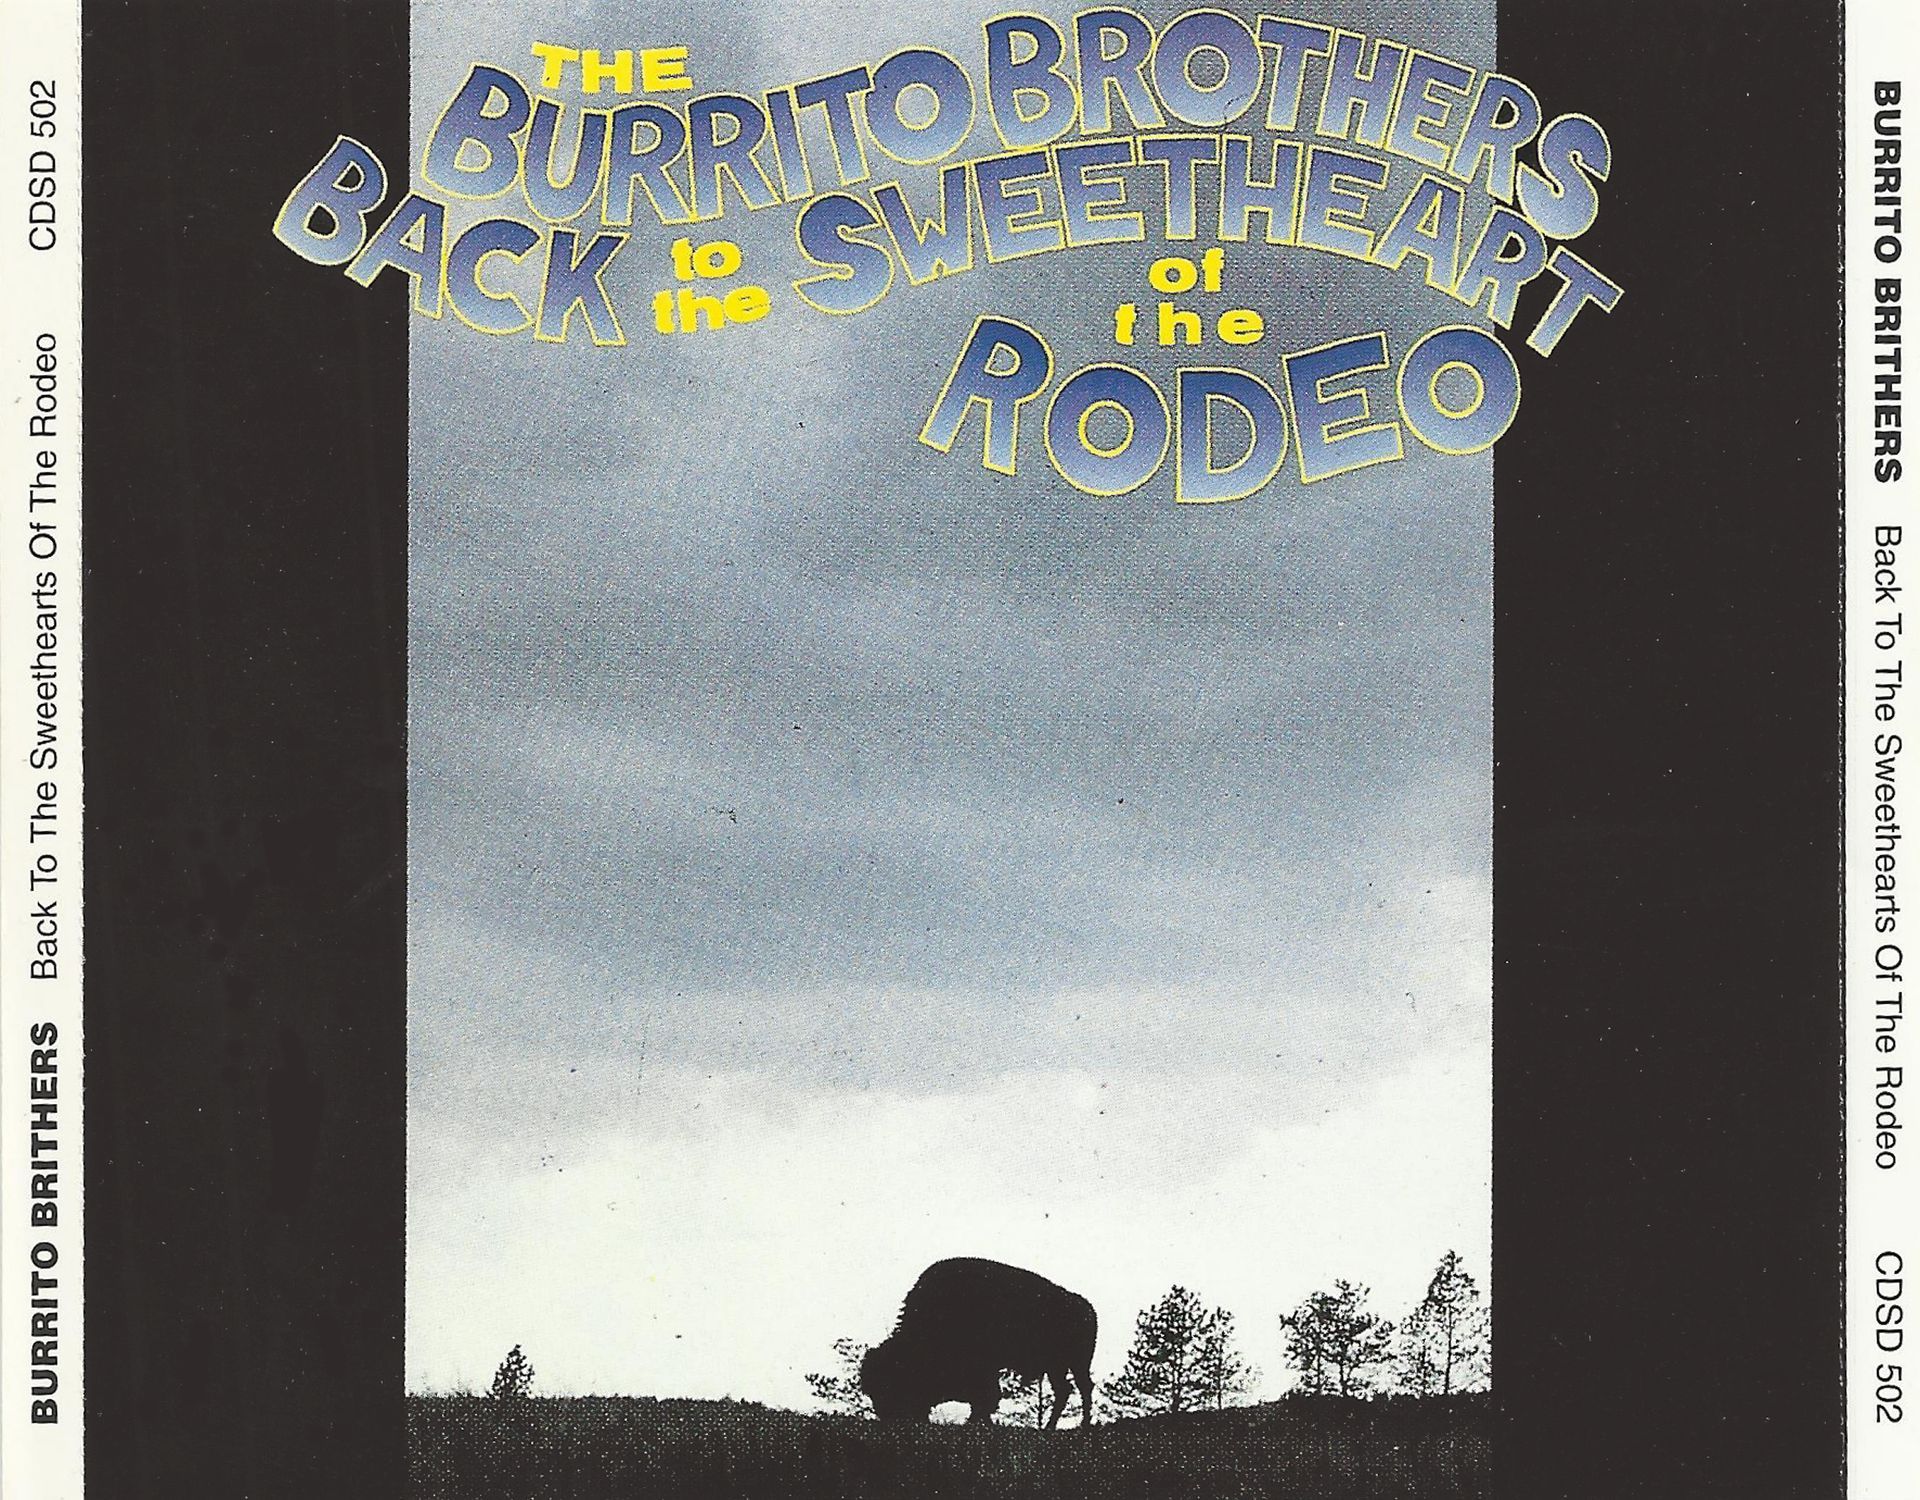 Back to the Sweetheart of the Rodeo album art